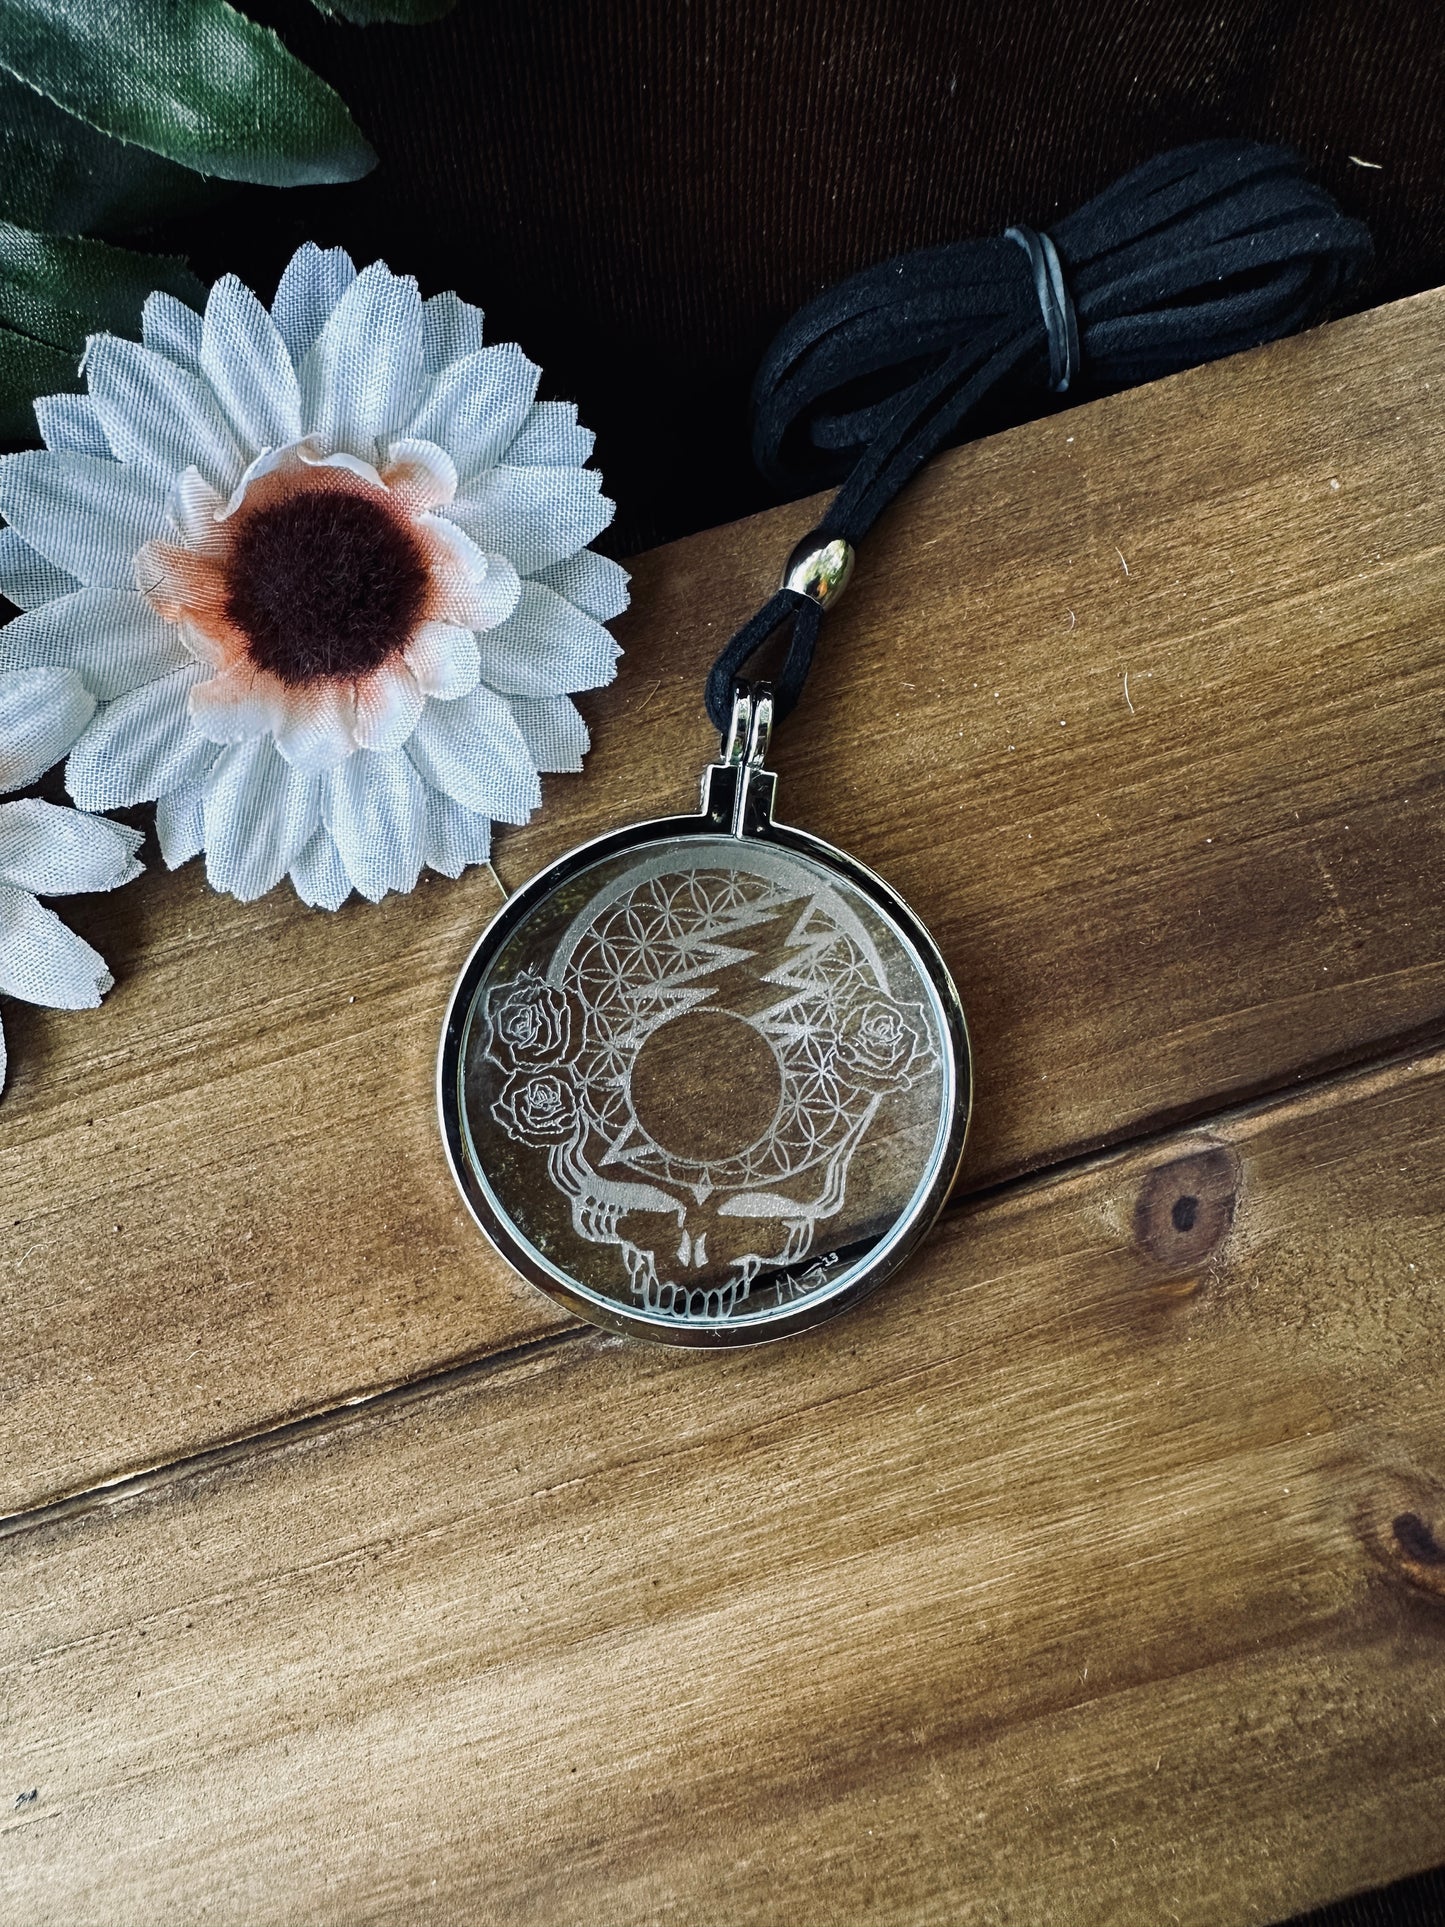 Grateful Dead Stealie Necklace, Solar Lighter, Magnifying Glass Necklace, Sustainable Jewelry, Cannabis Accessory